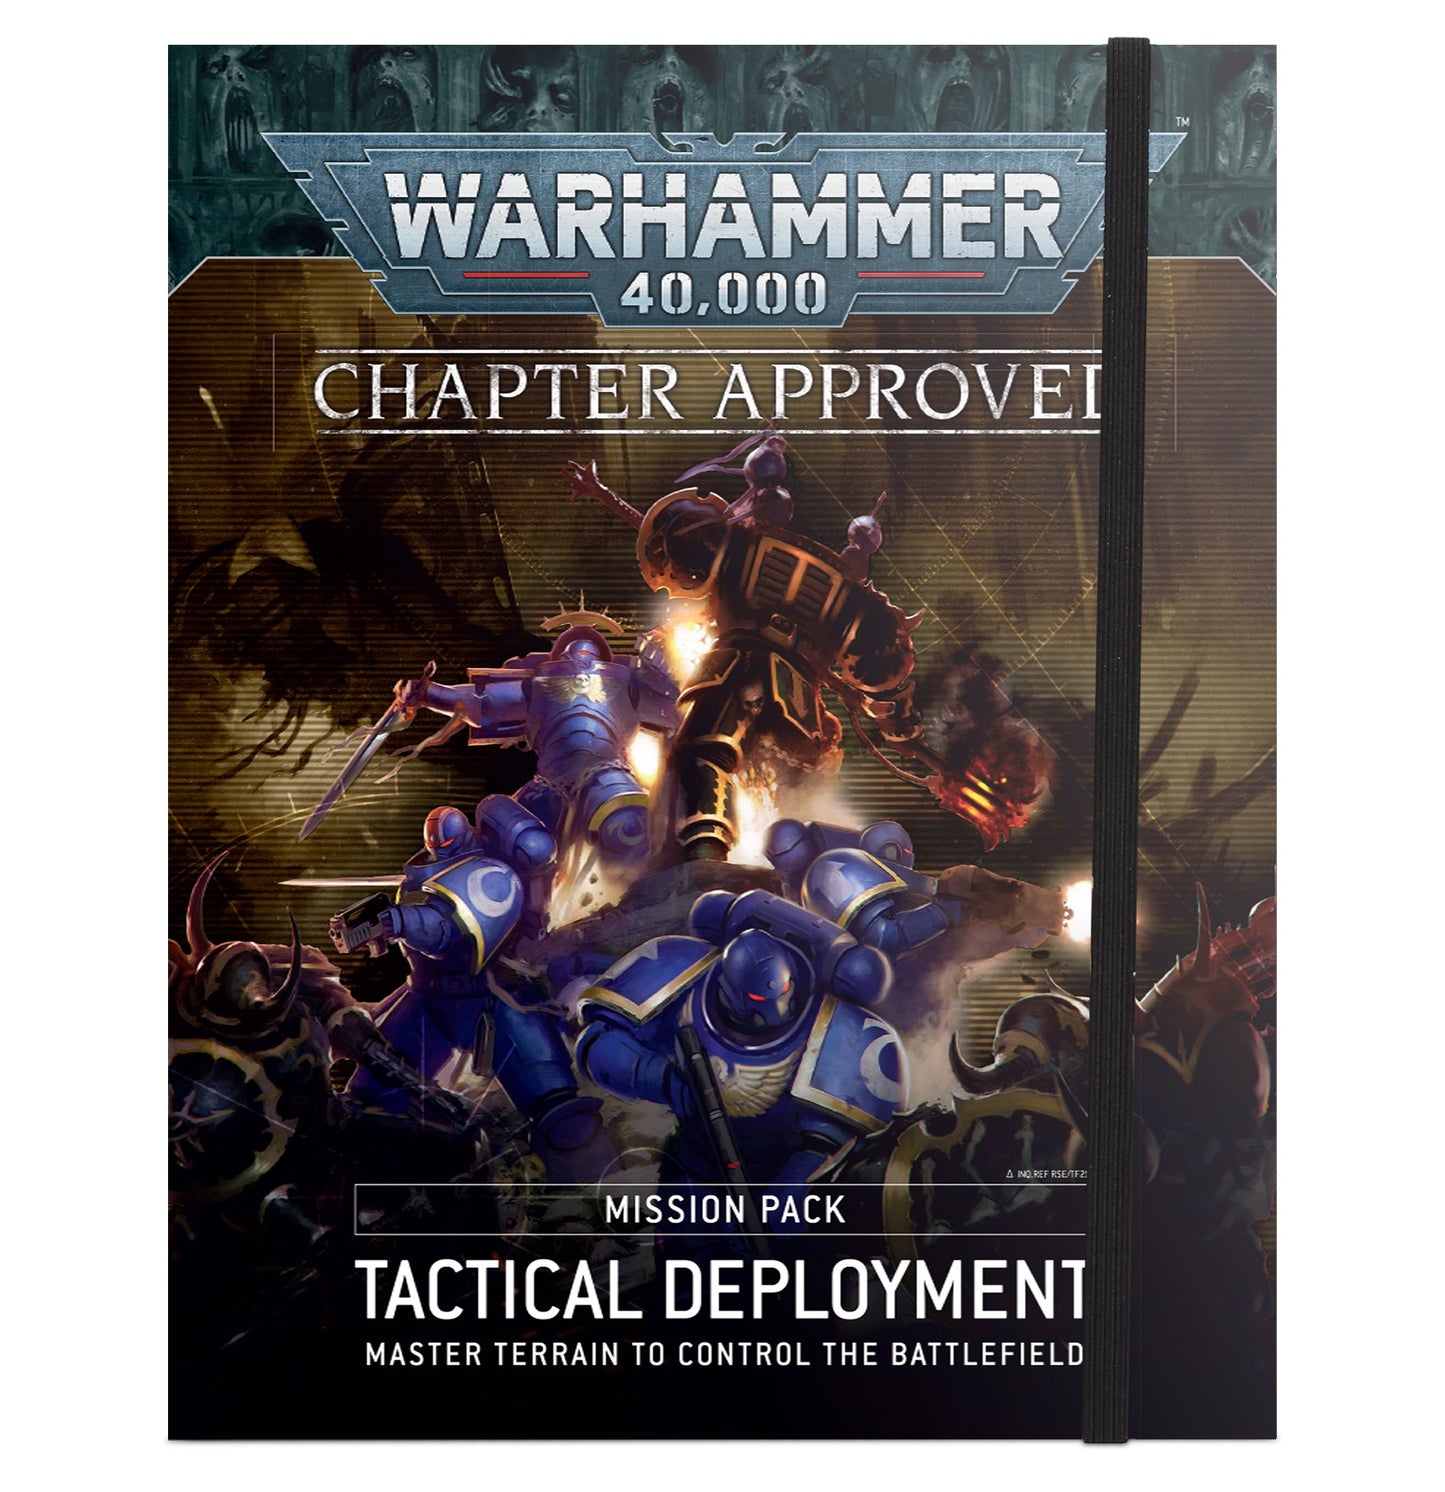 LAST ONE - Warhammer 40000: Chapter Approved - Tactical Deployment Mission Pack